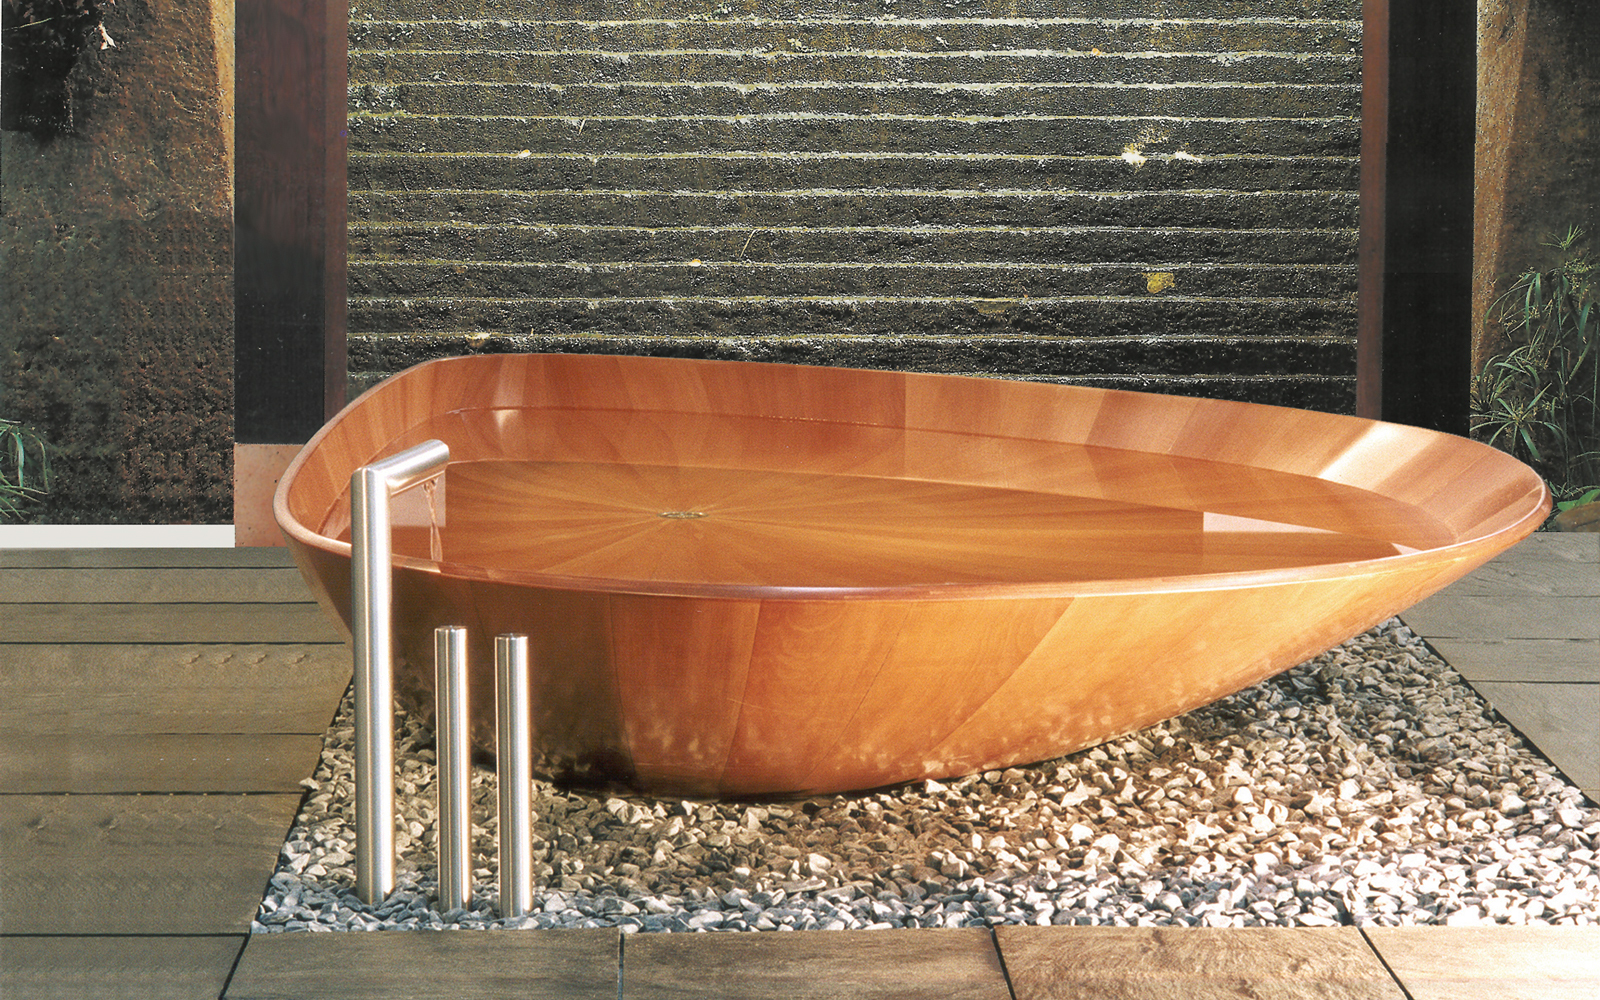 10 Luxurious Wooden Bathtubs For Home Spas